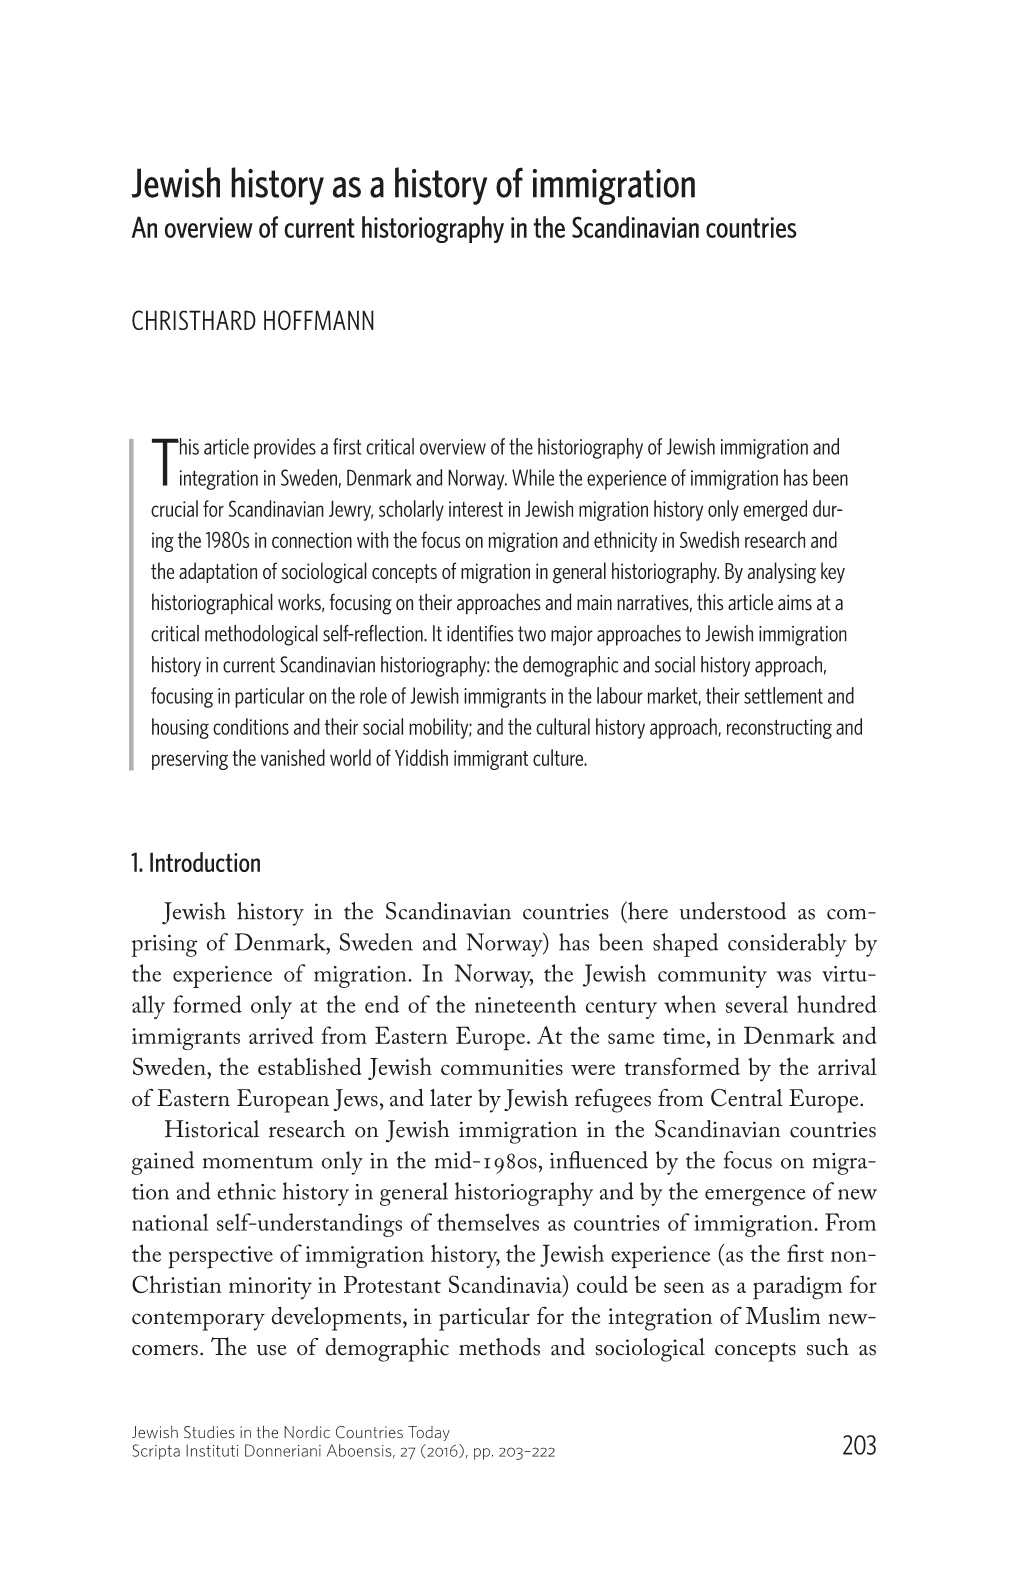 Jewish History As a History of Immigration an Overview of Current Historiography in the Scandinavian Countries